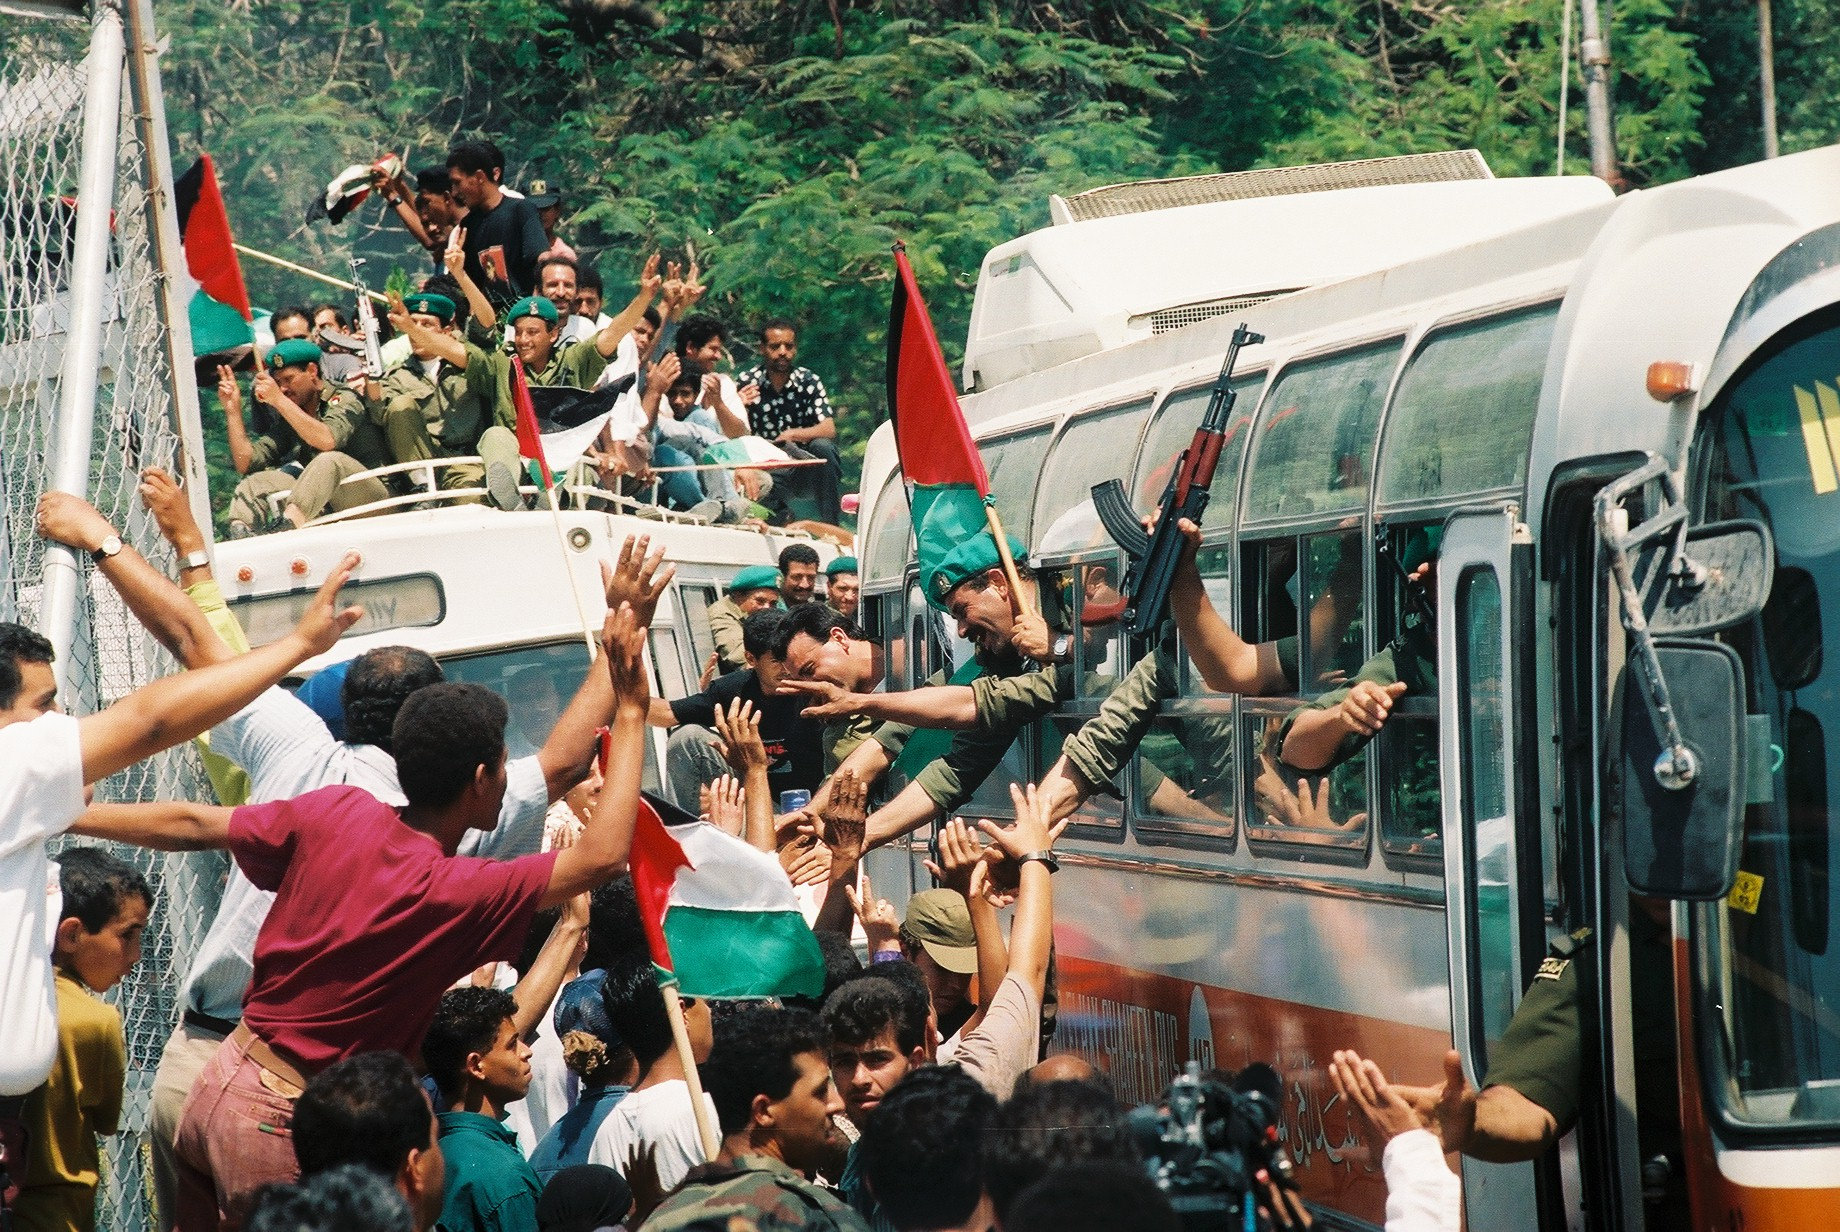 Palestinian policemen celebrate their entry into the West Bank city of Jericho, in accordance with the Oslo Accords, May 13, 1994. (Yossi Zamir/Flash 90)